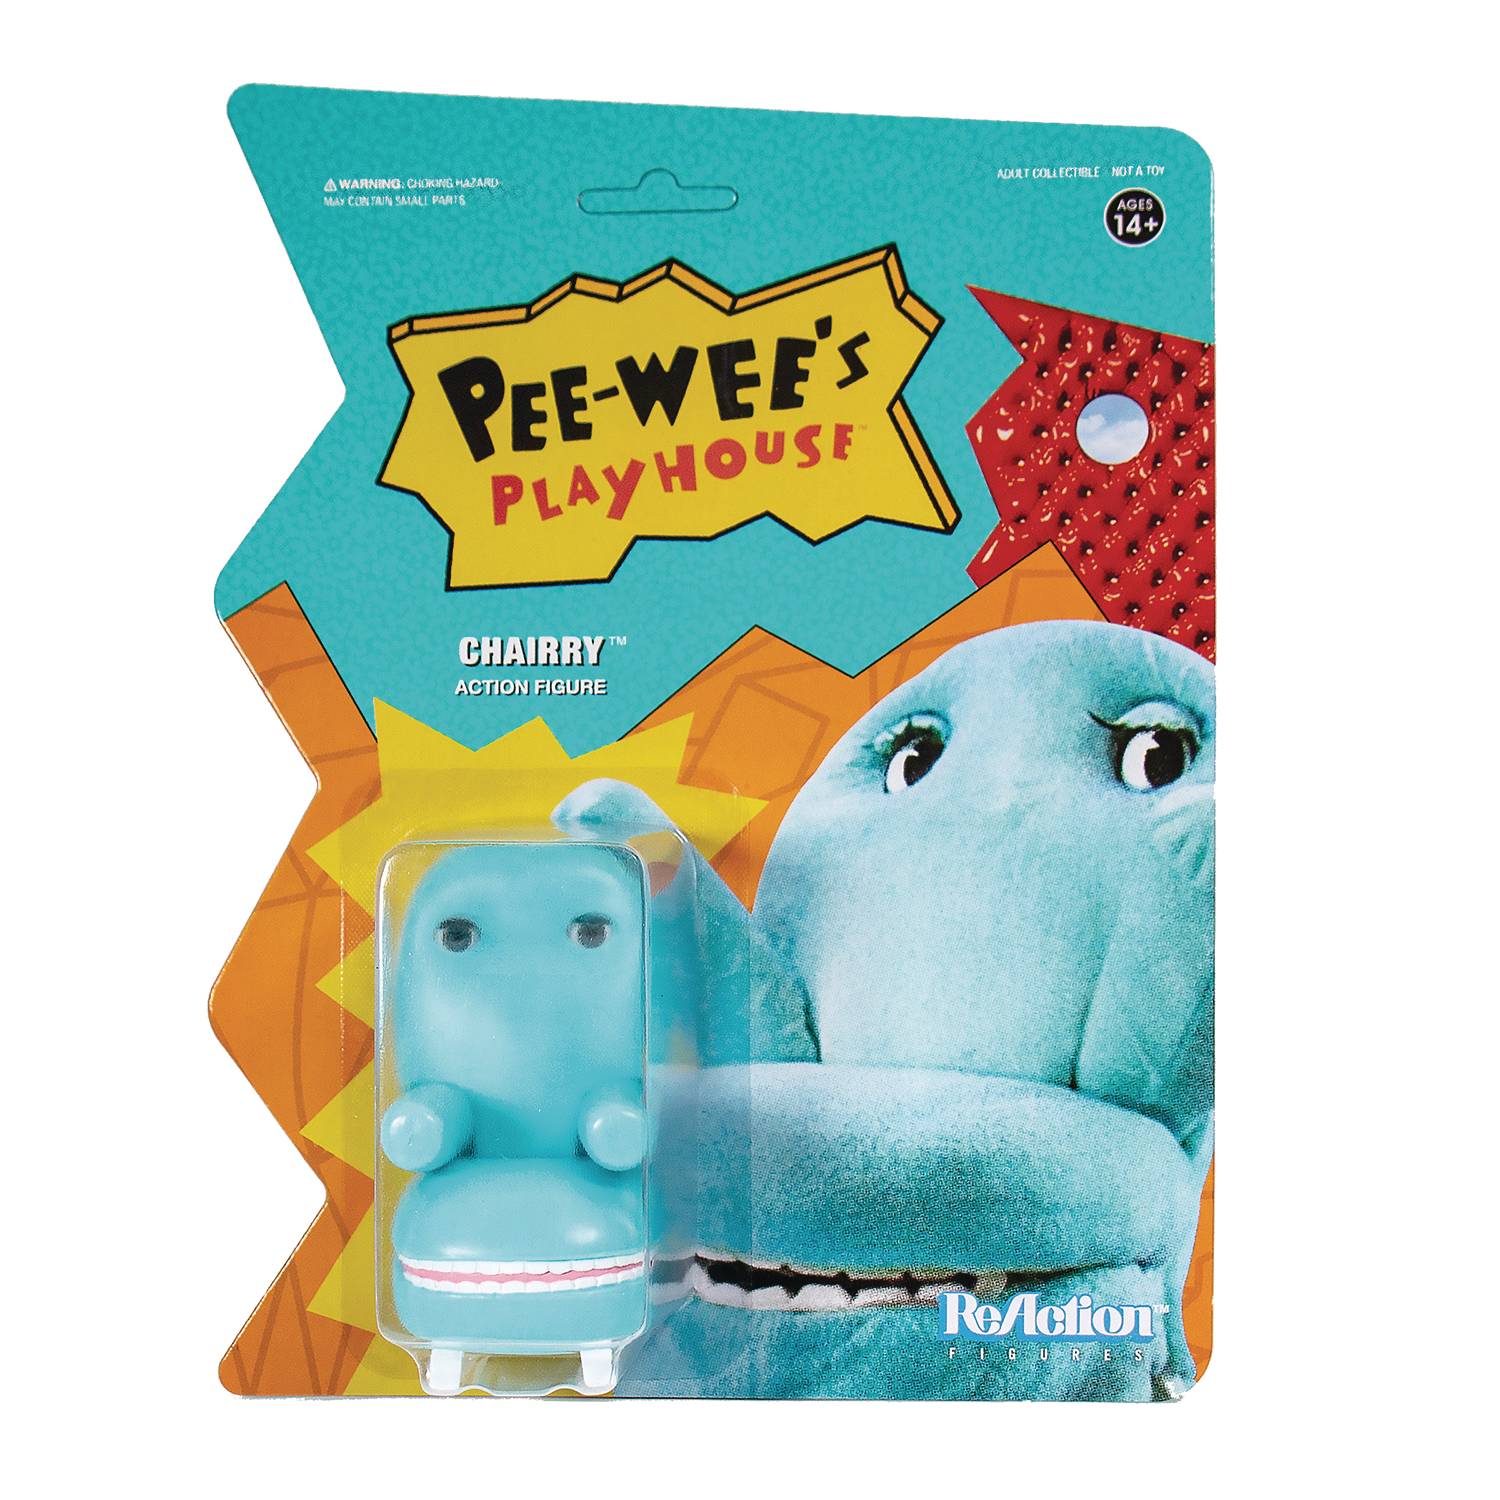 PEE WEES PLAYHOUSE CHAIRRY REACTION FIGURE